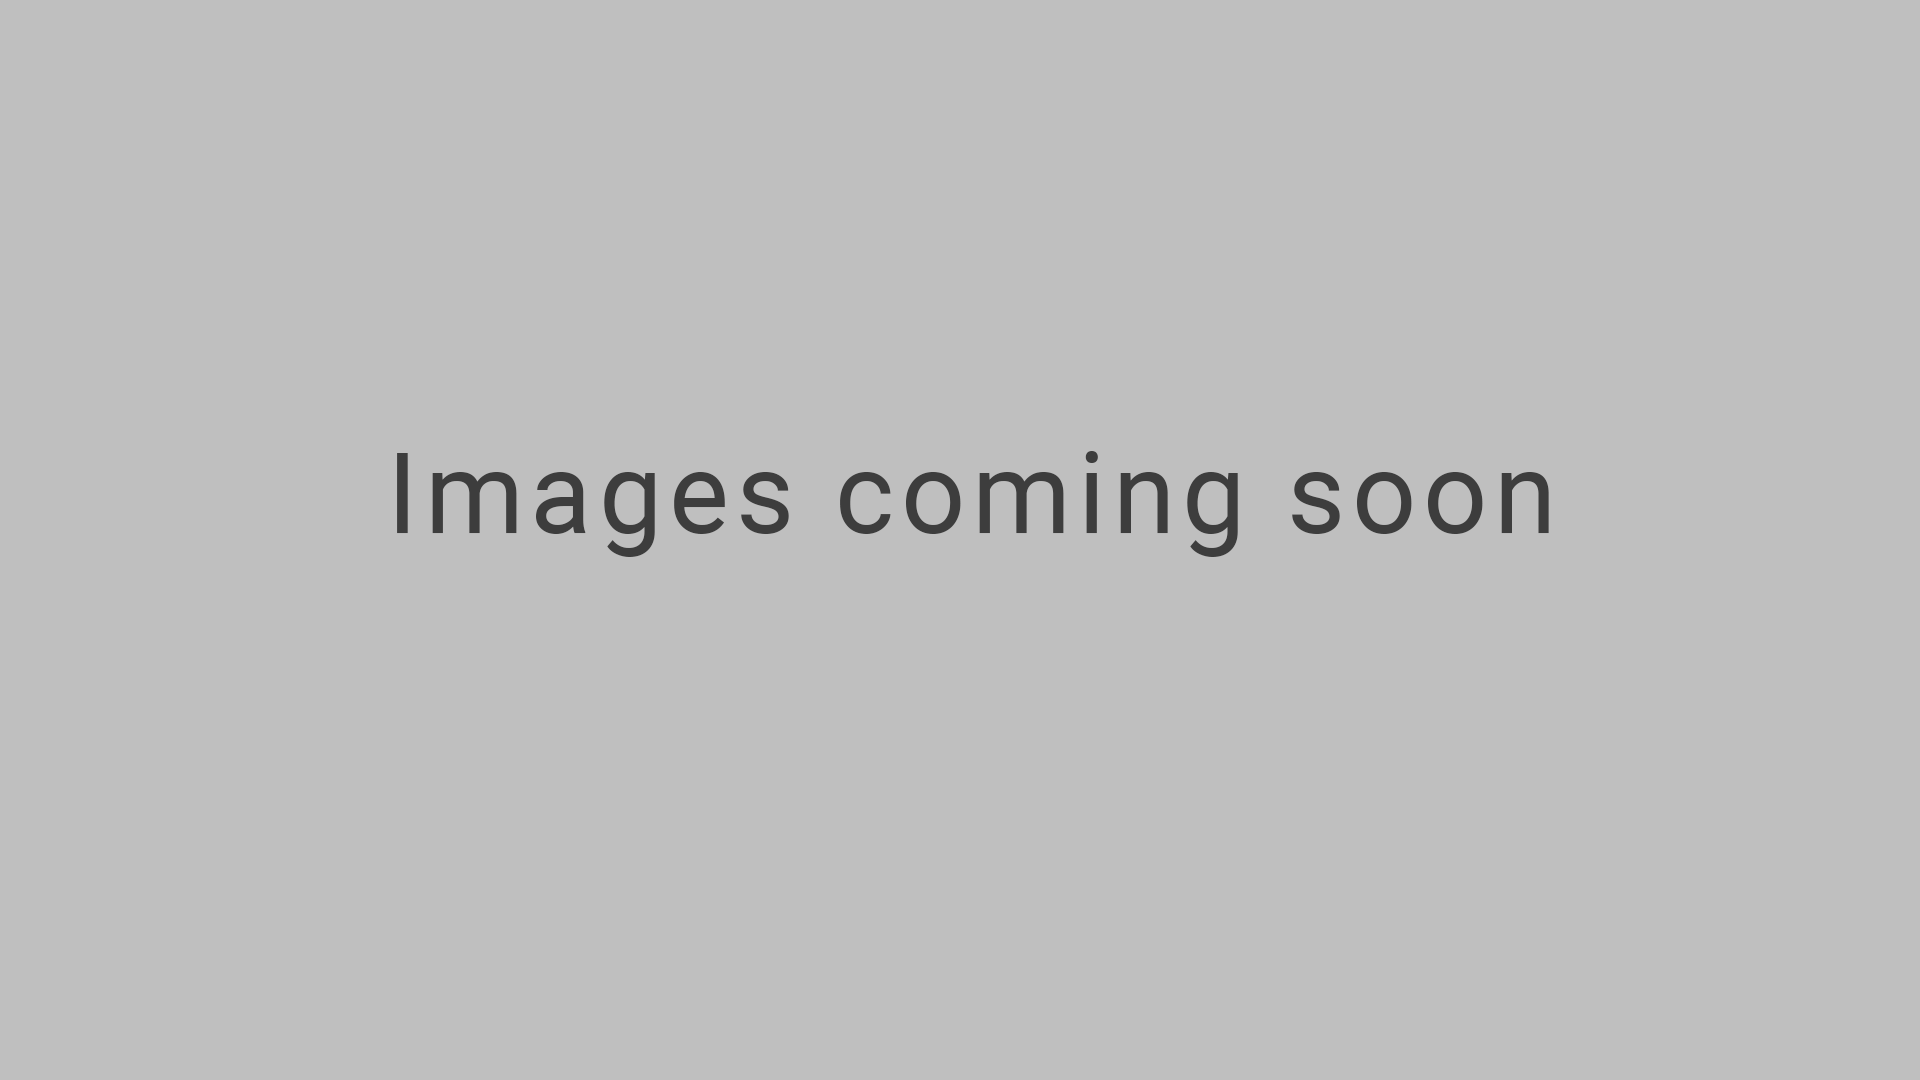 Images-coming-soon